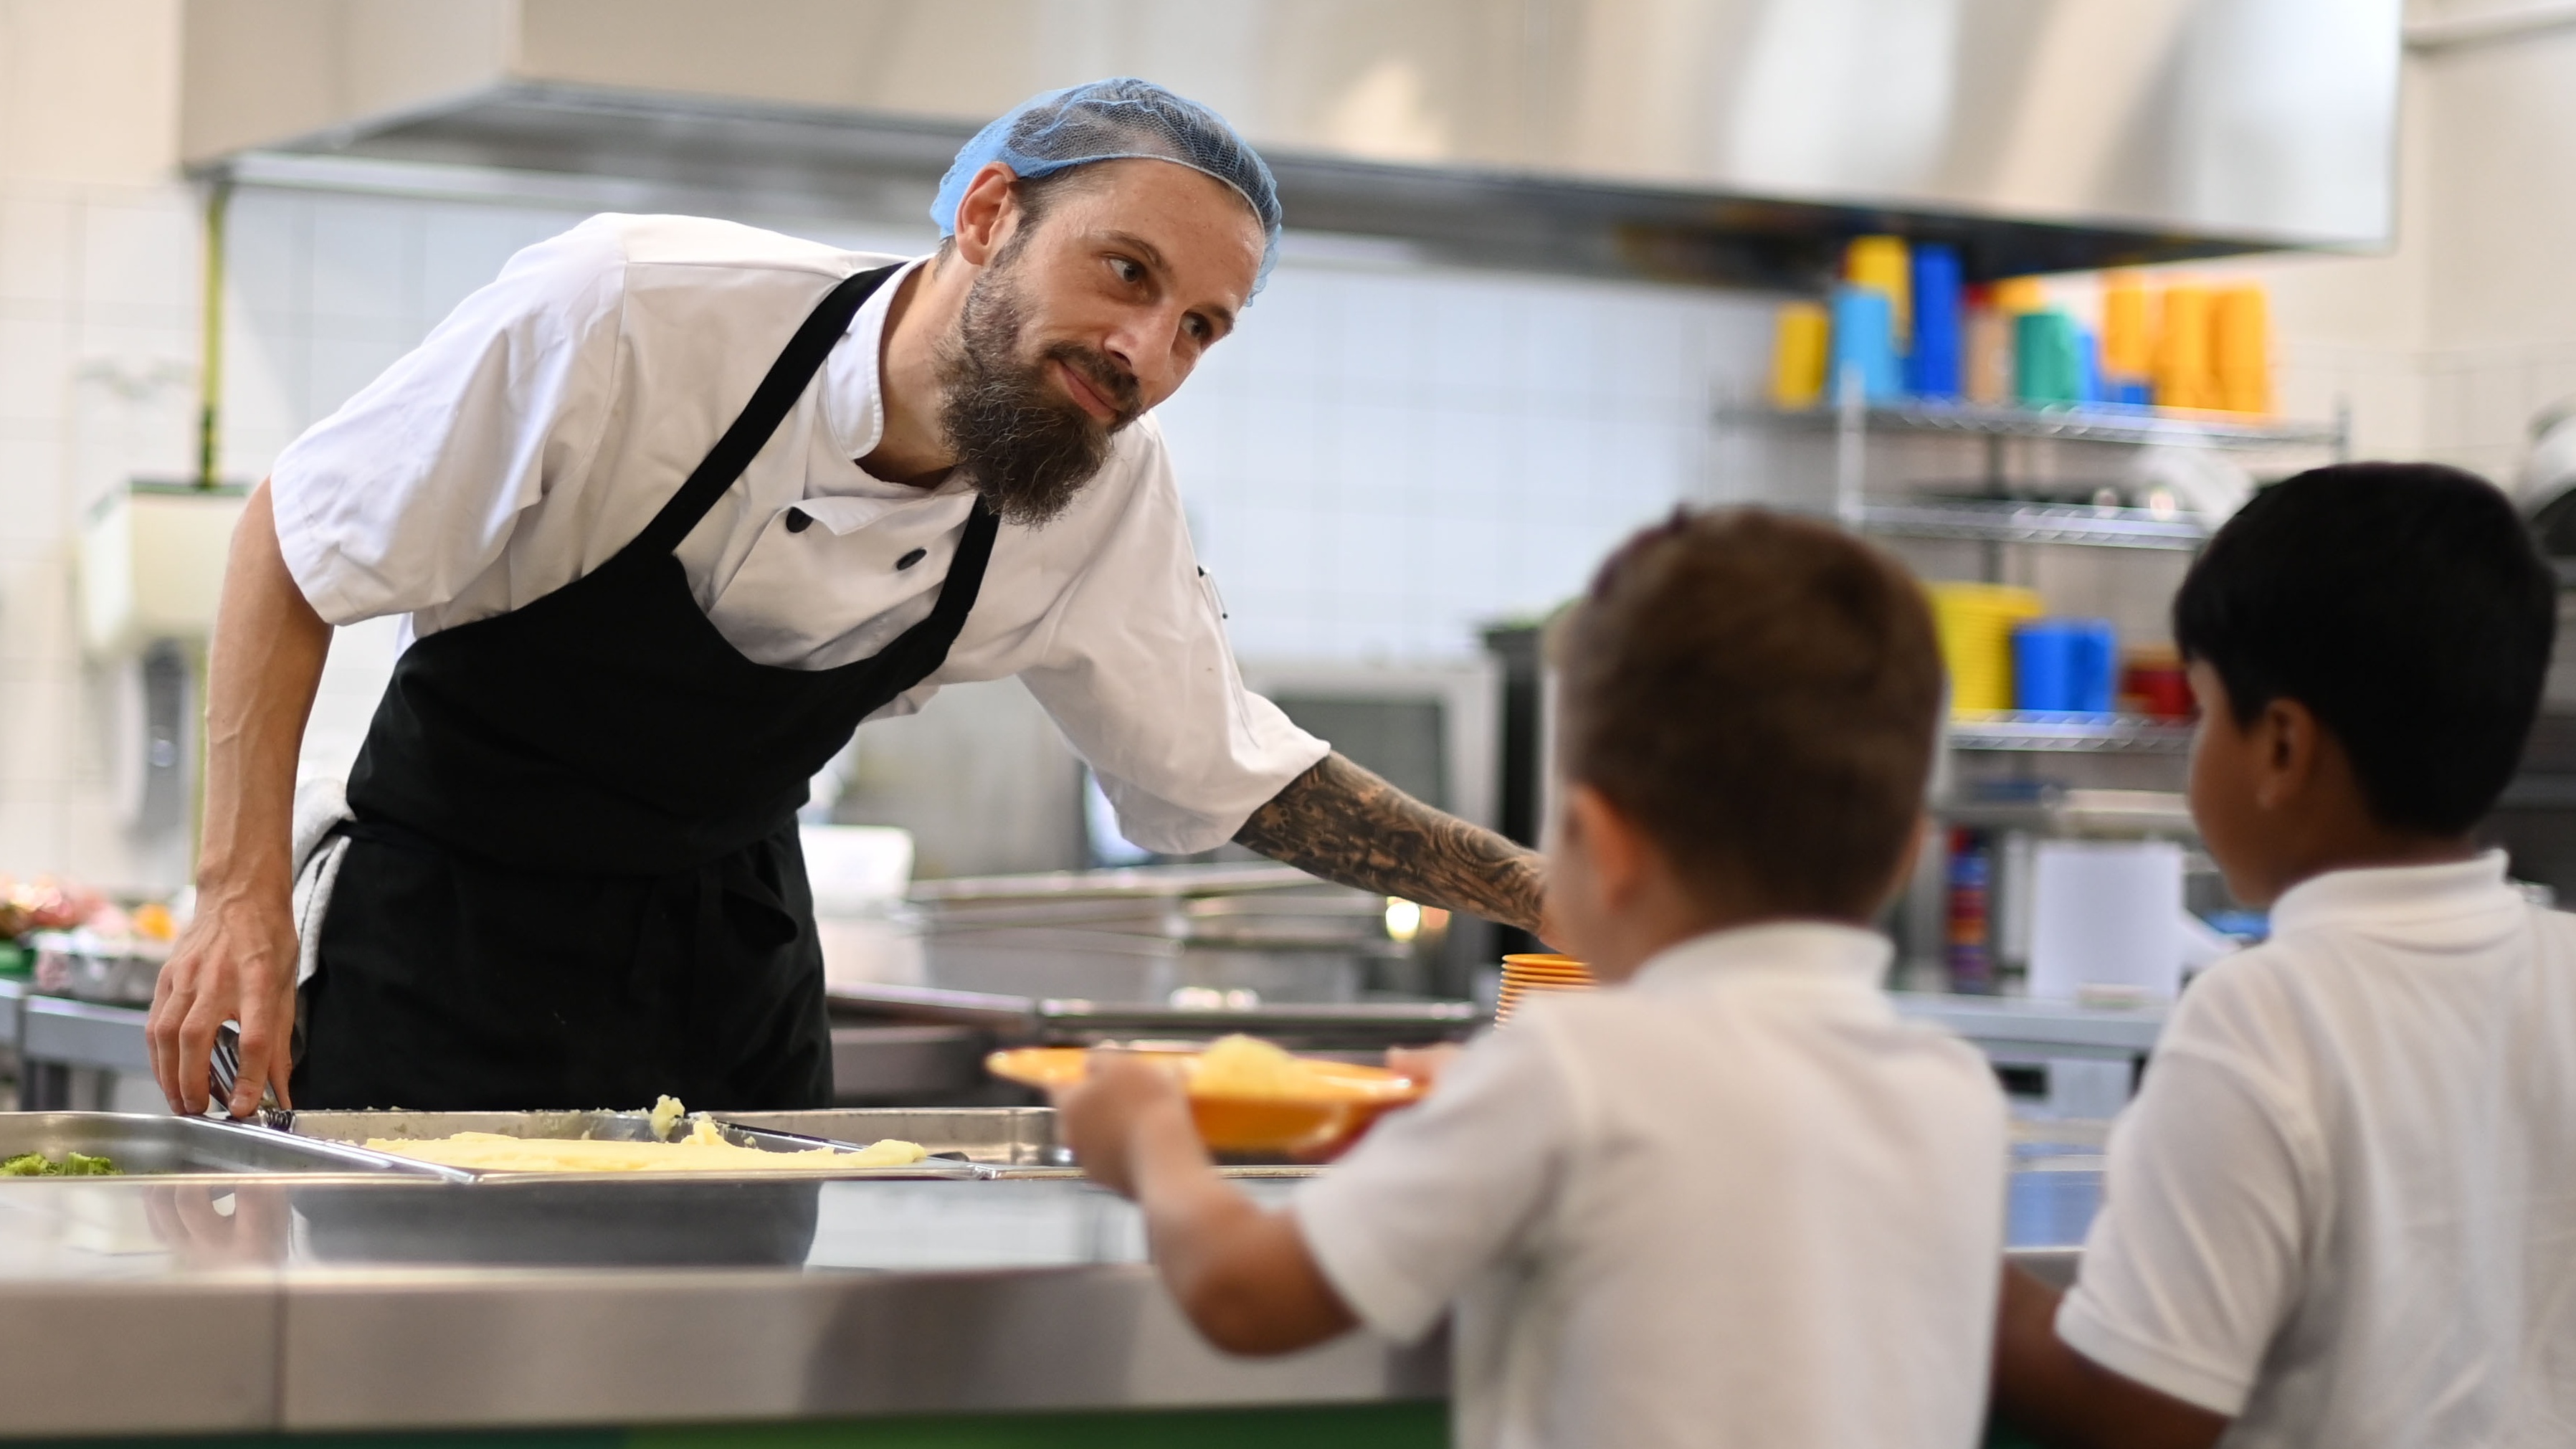 A school chef serves cooked hot dinner to students on their lunch break 